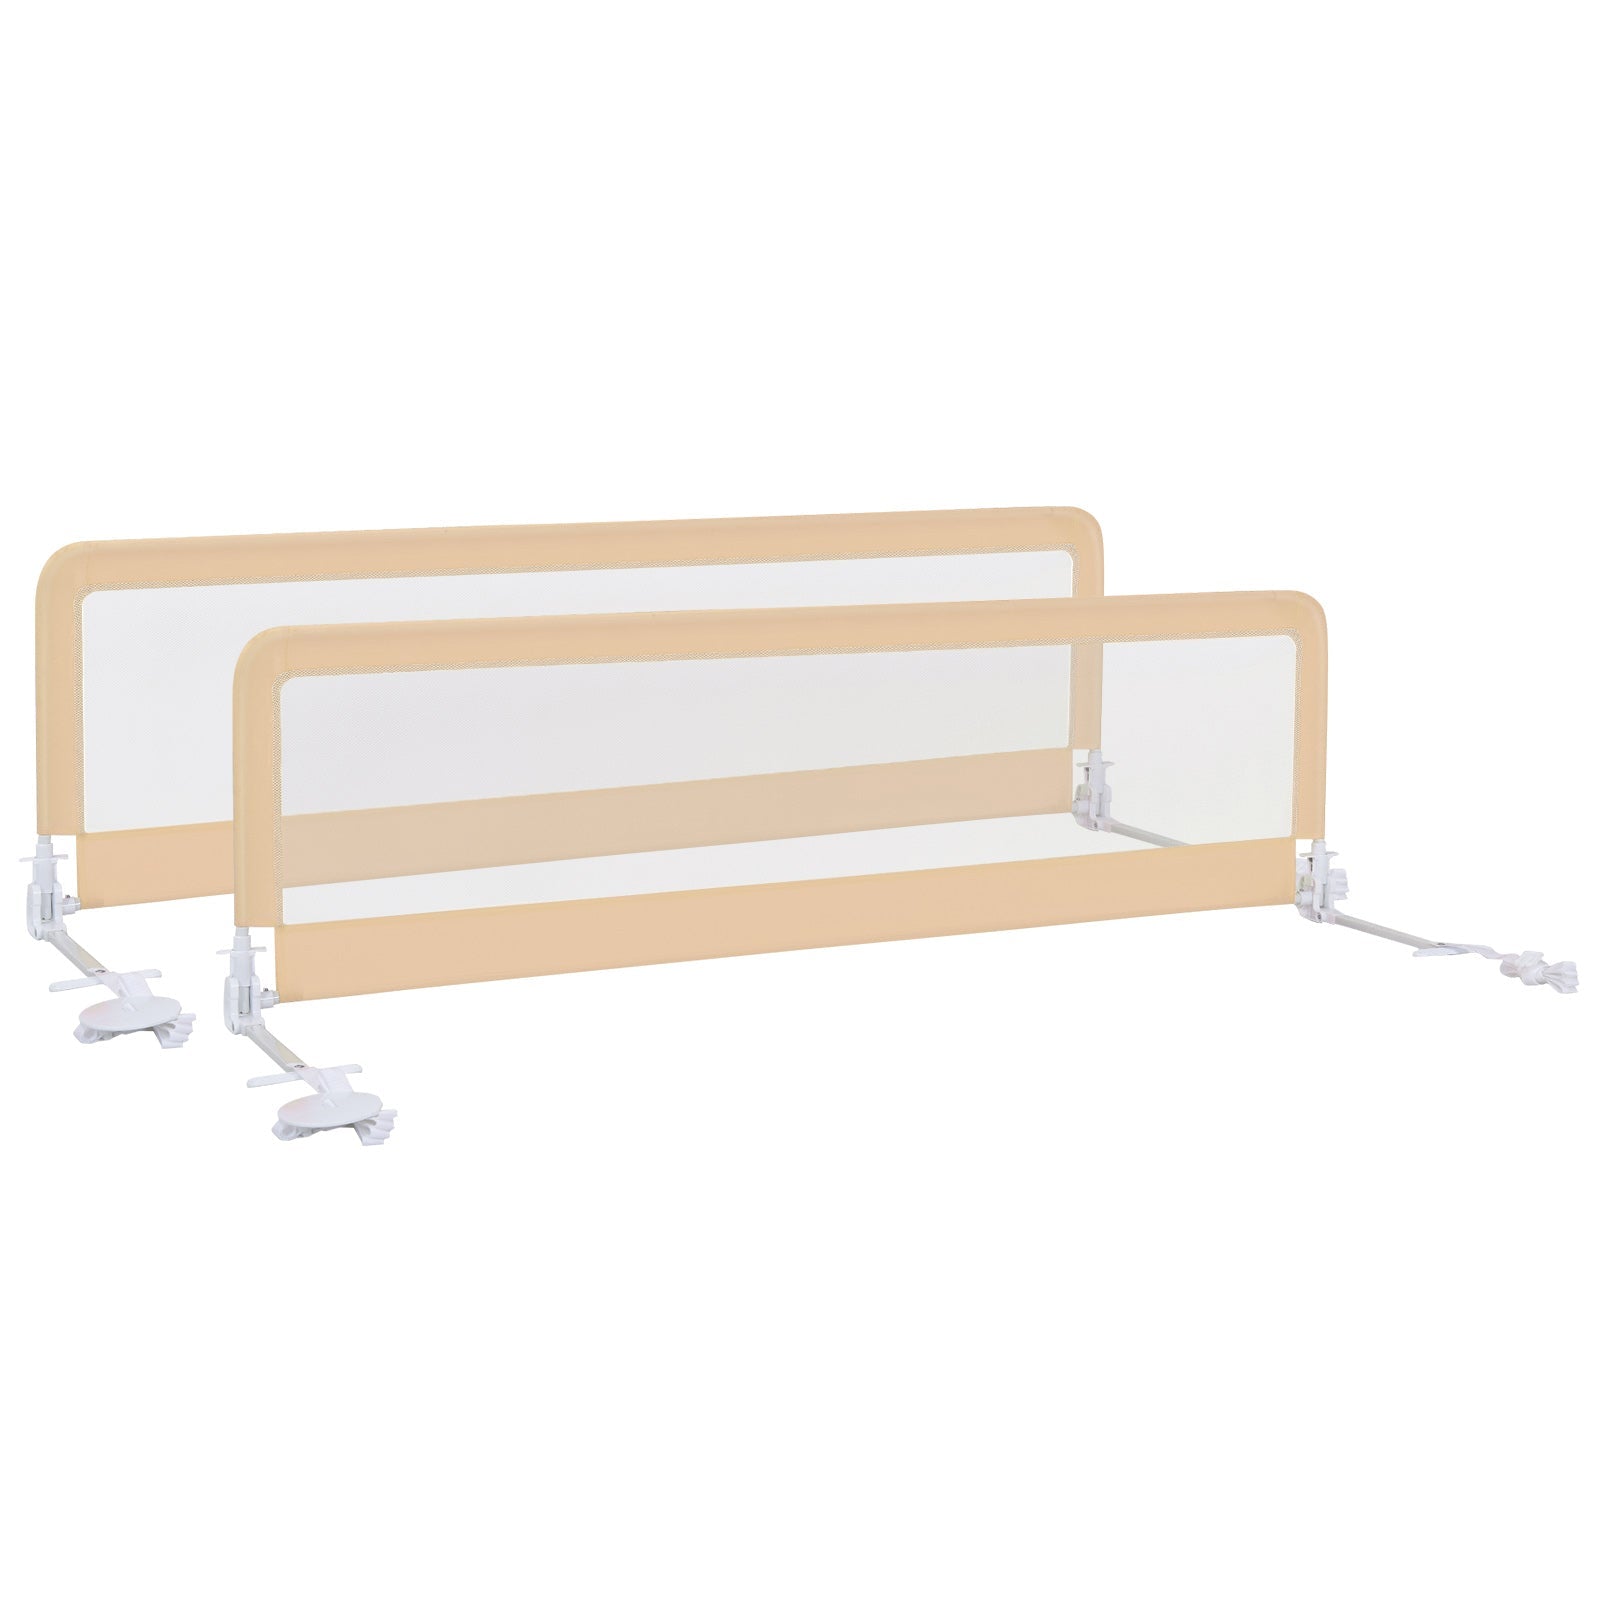 Toddler Bed Rail - Foldable Beige Mesh with Safety Straps, Comfort